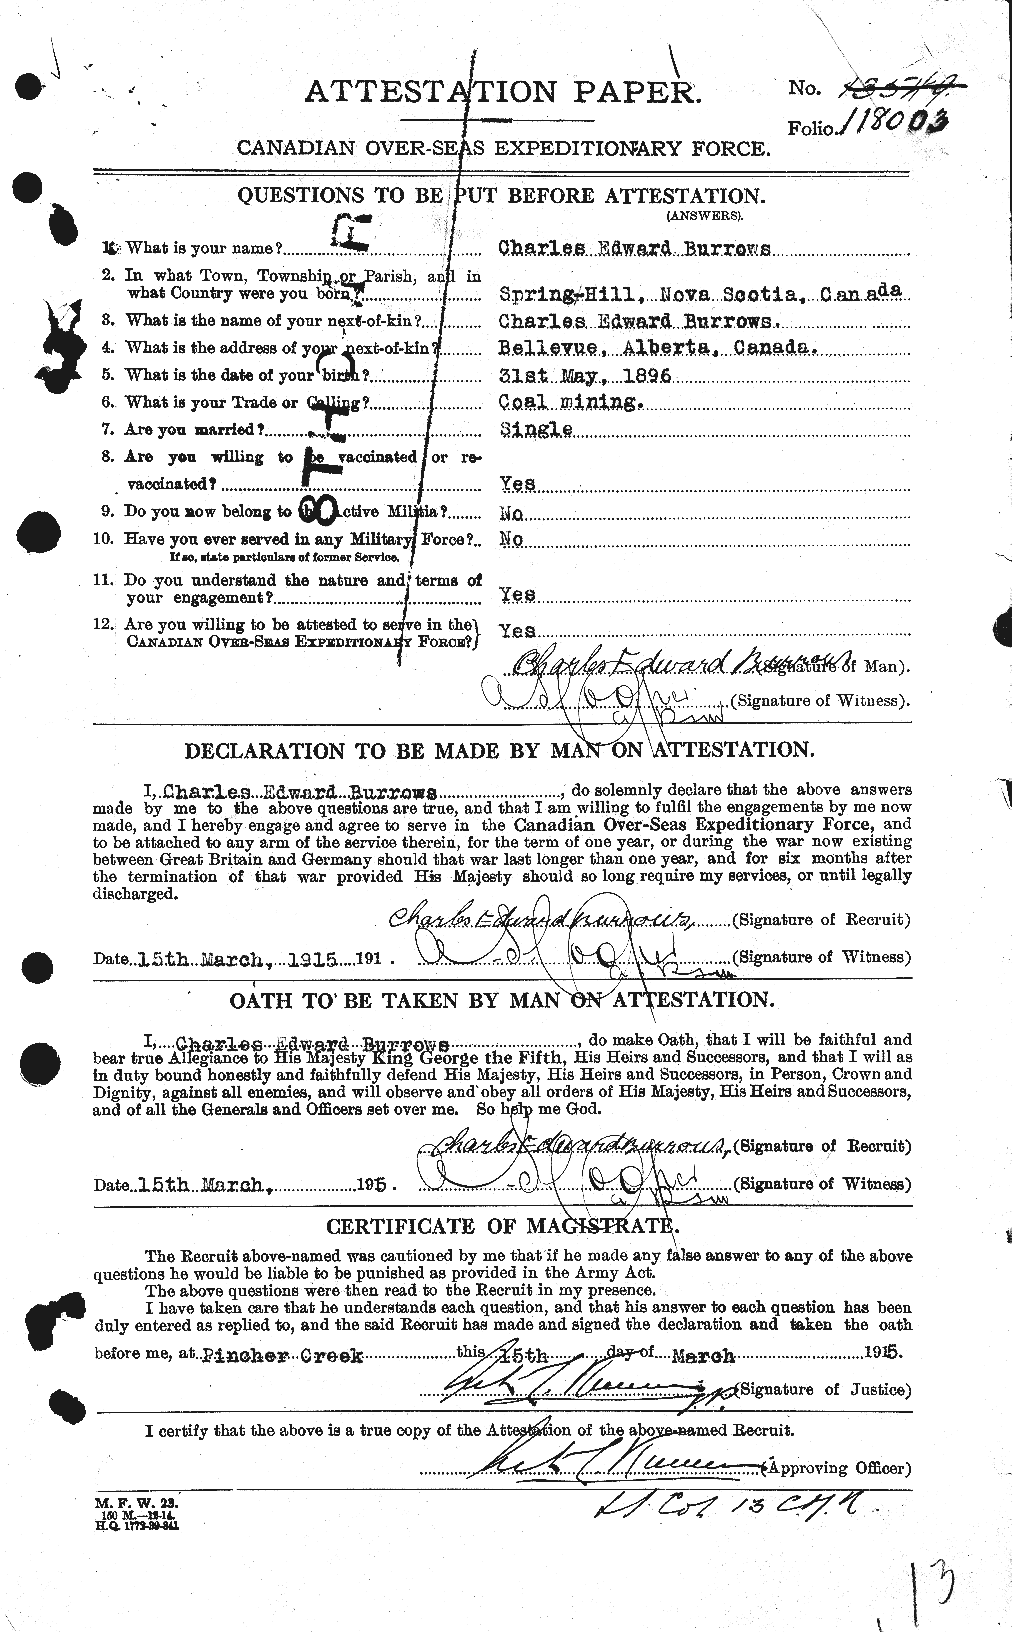 Personnel Records of the First World War - CEF 274785a